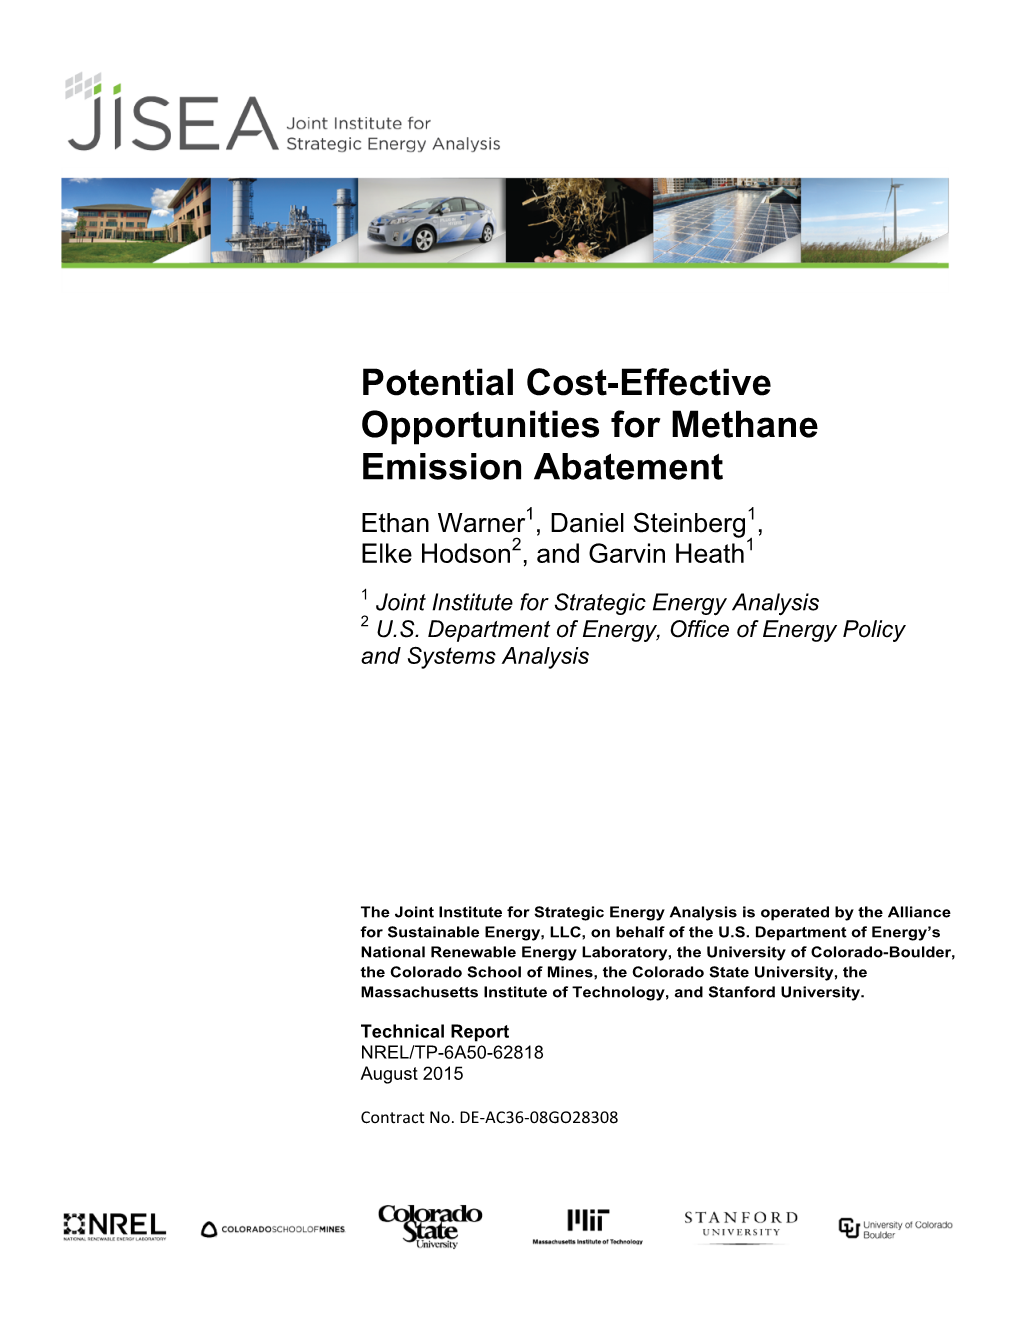 Potential Cost-Effective Opportunities for Methane Emission Abatement